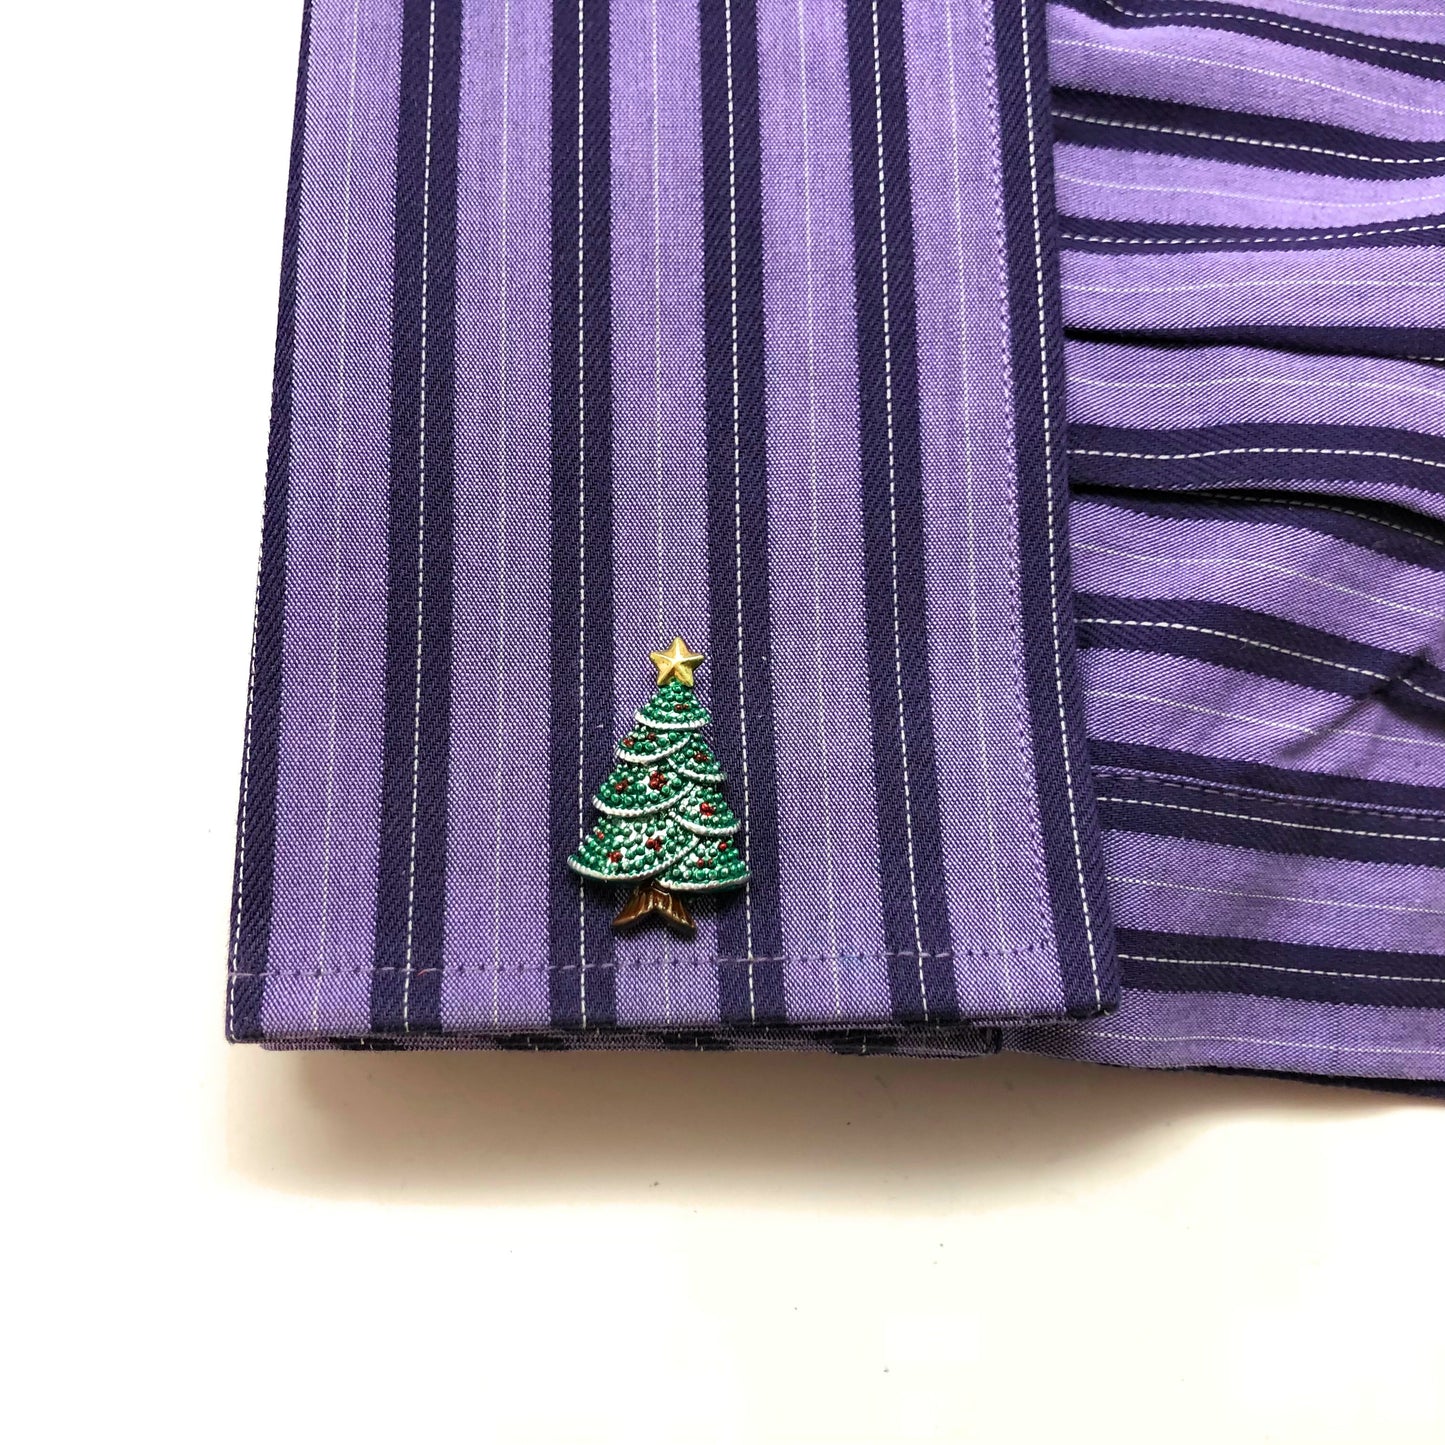 Hand Painted Christmas Tree Cufflinks Holiday Fun Work Party Gift